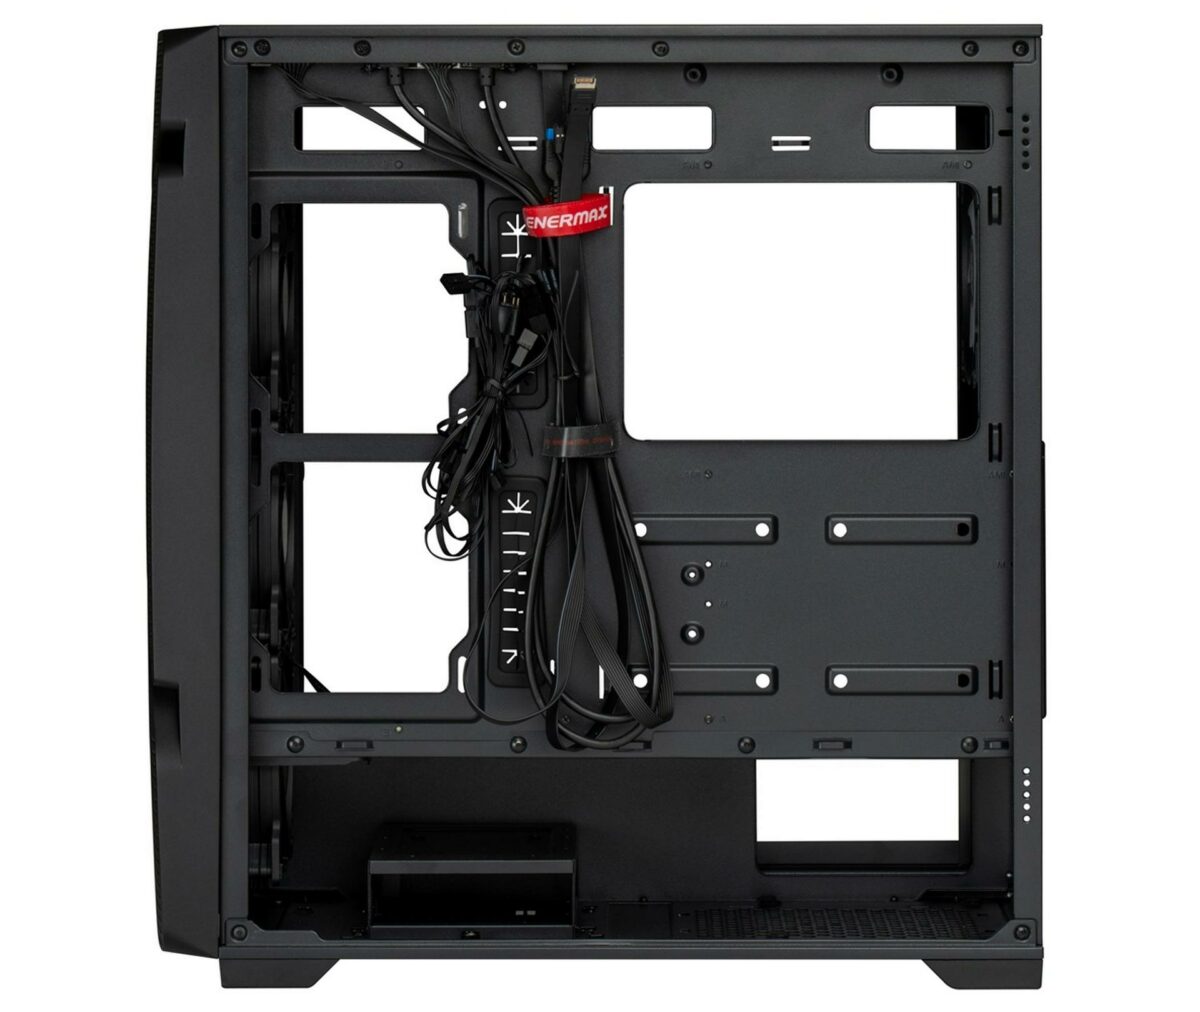 Enermax MS31 black PC case with the right side panel taken off, displaying the cable management.